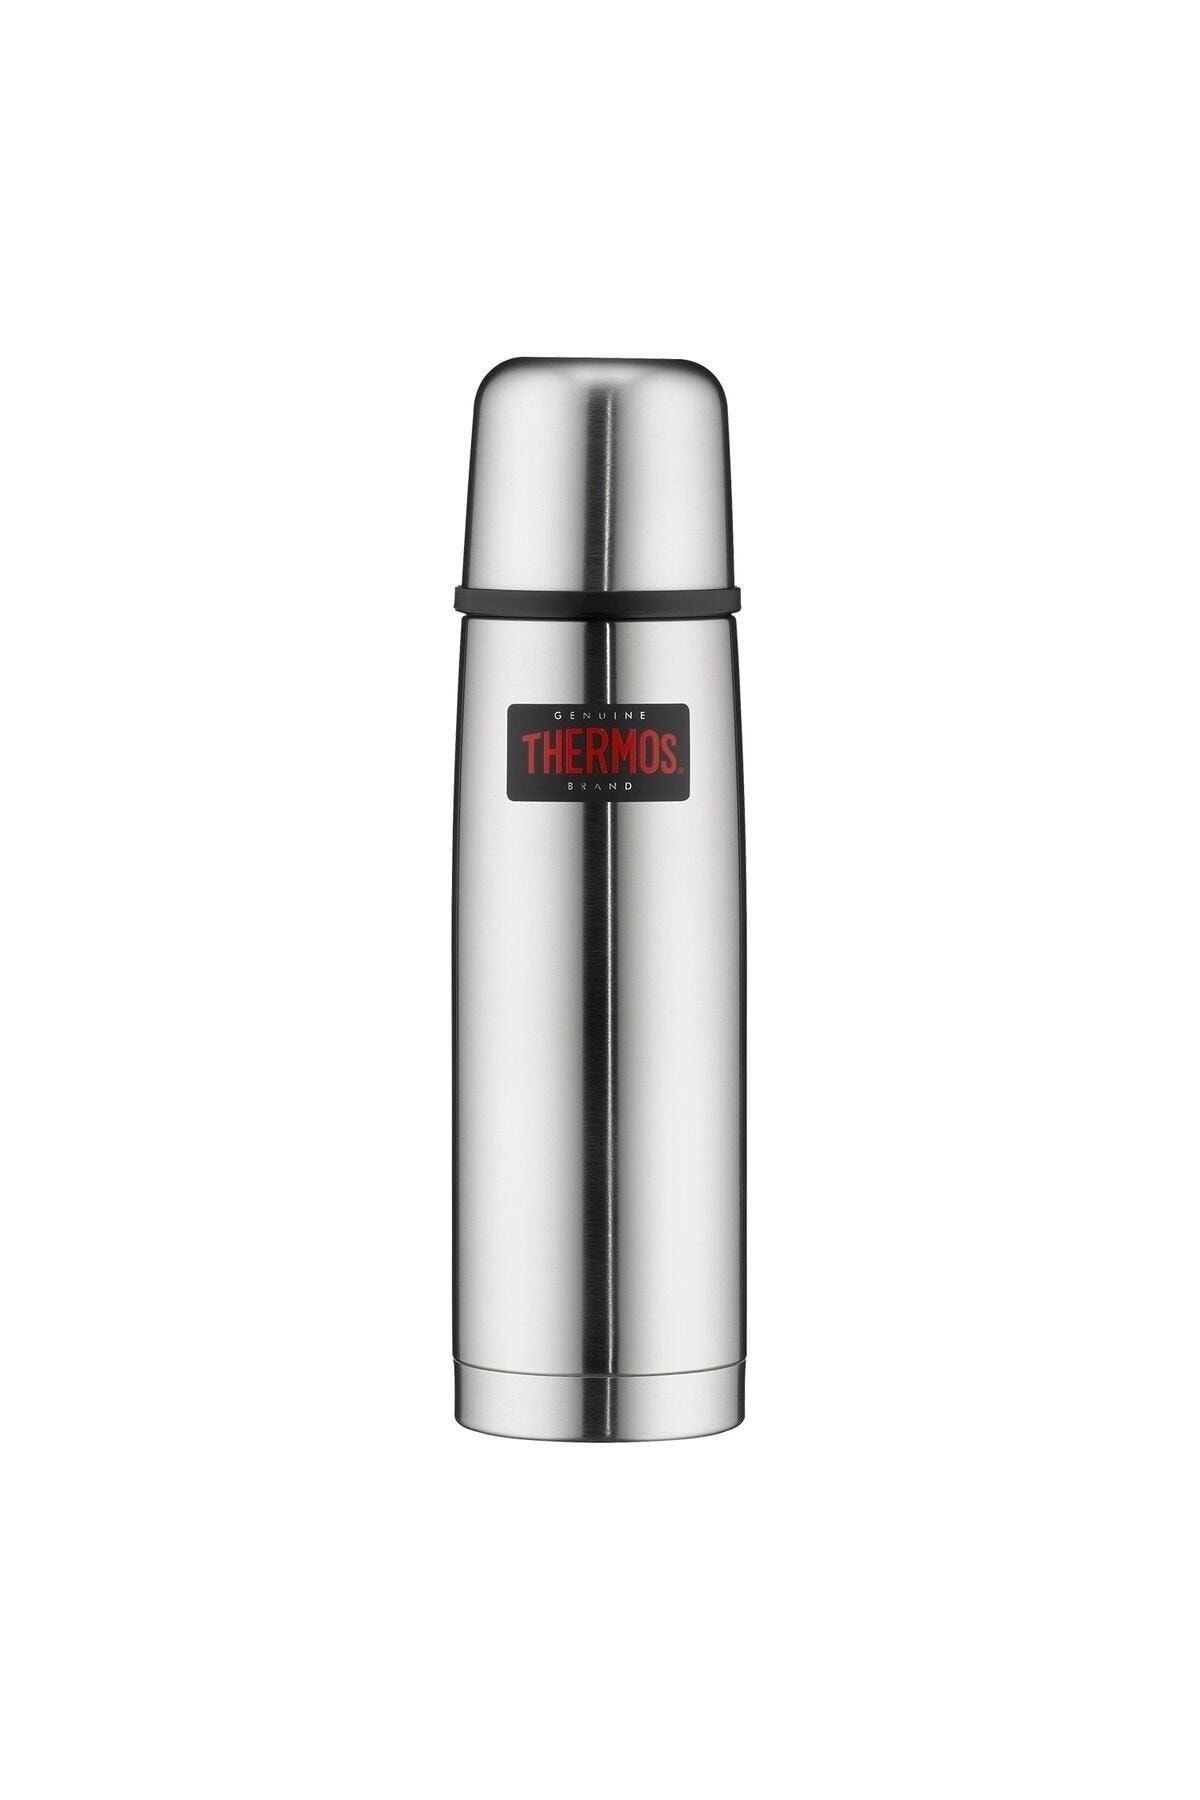 Thermos Fbb-500 Staltermos Classic Stainless Steel 183585